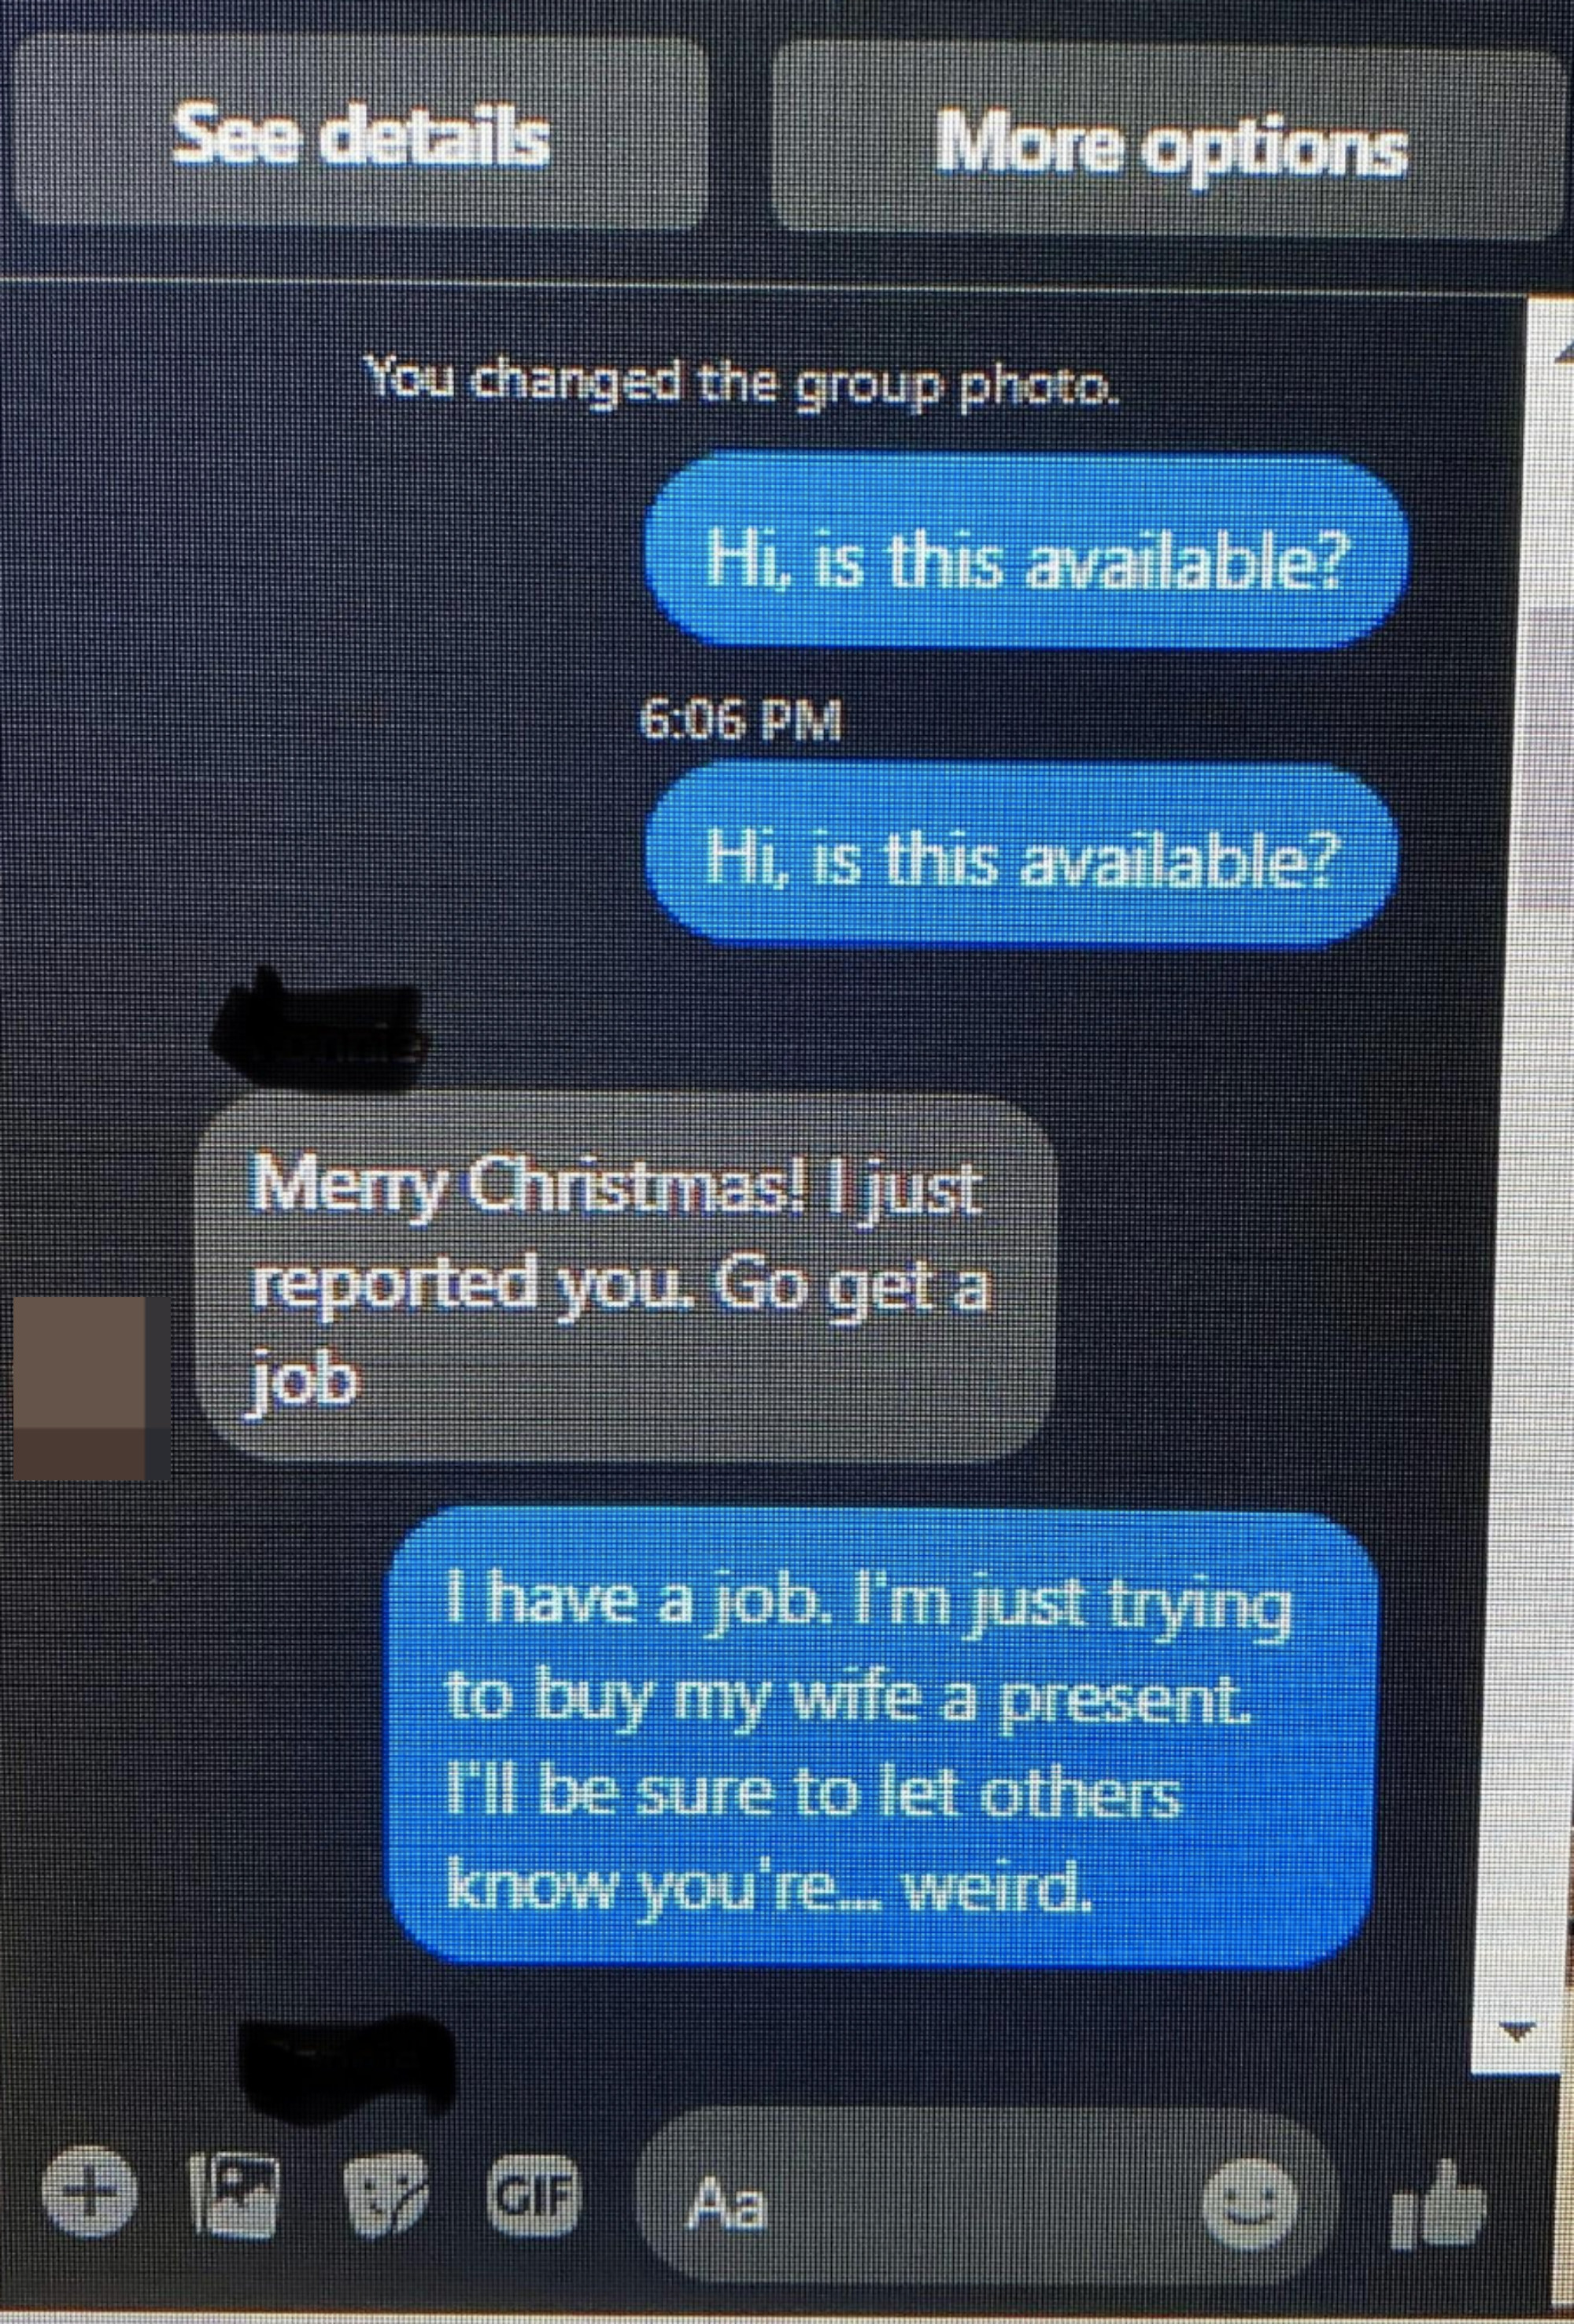 Person asks twice if the item is still available, the seller says Merry Christmas, I just reported you, go get a job,&quot; and person says &quot;I have a job, I&#x27;m just trying to buy my wife a present; I&#x27;ll be sure to let others know you&#x27;re weird&quot;